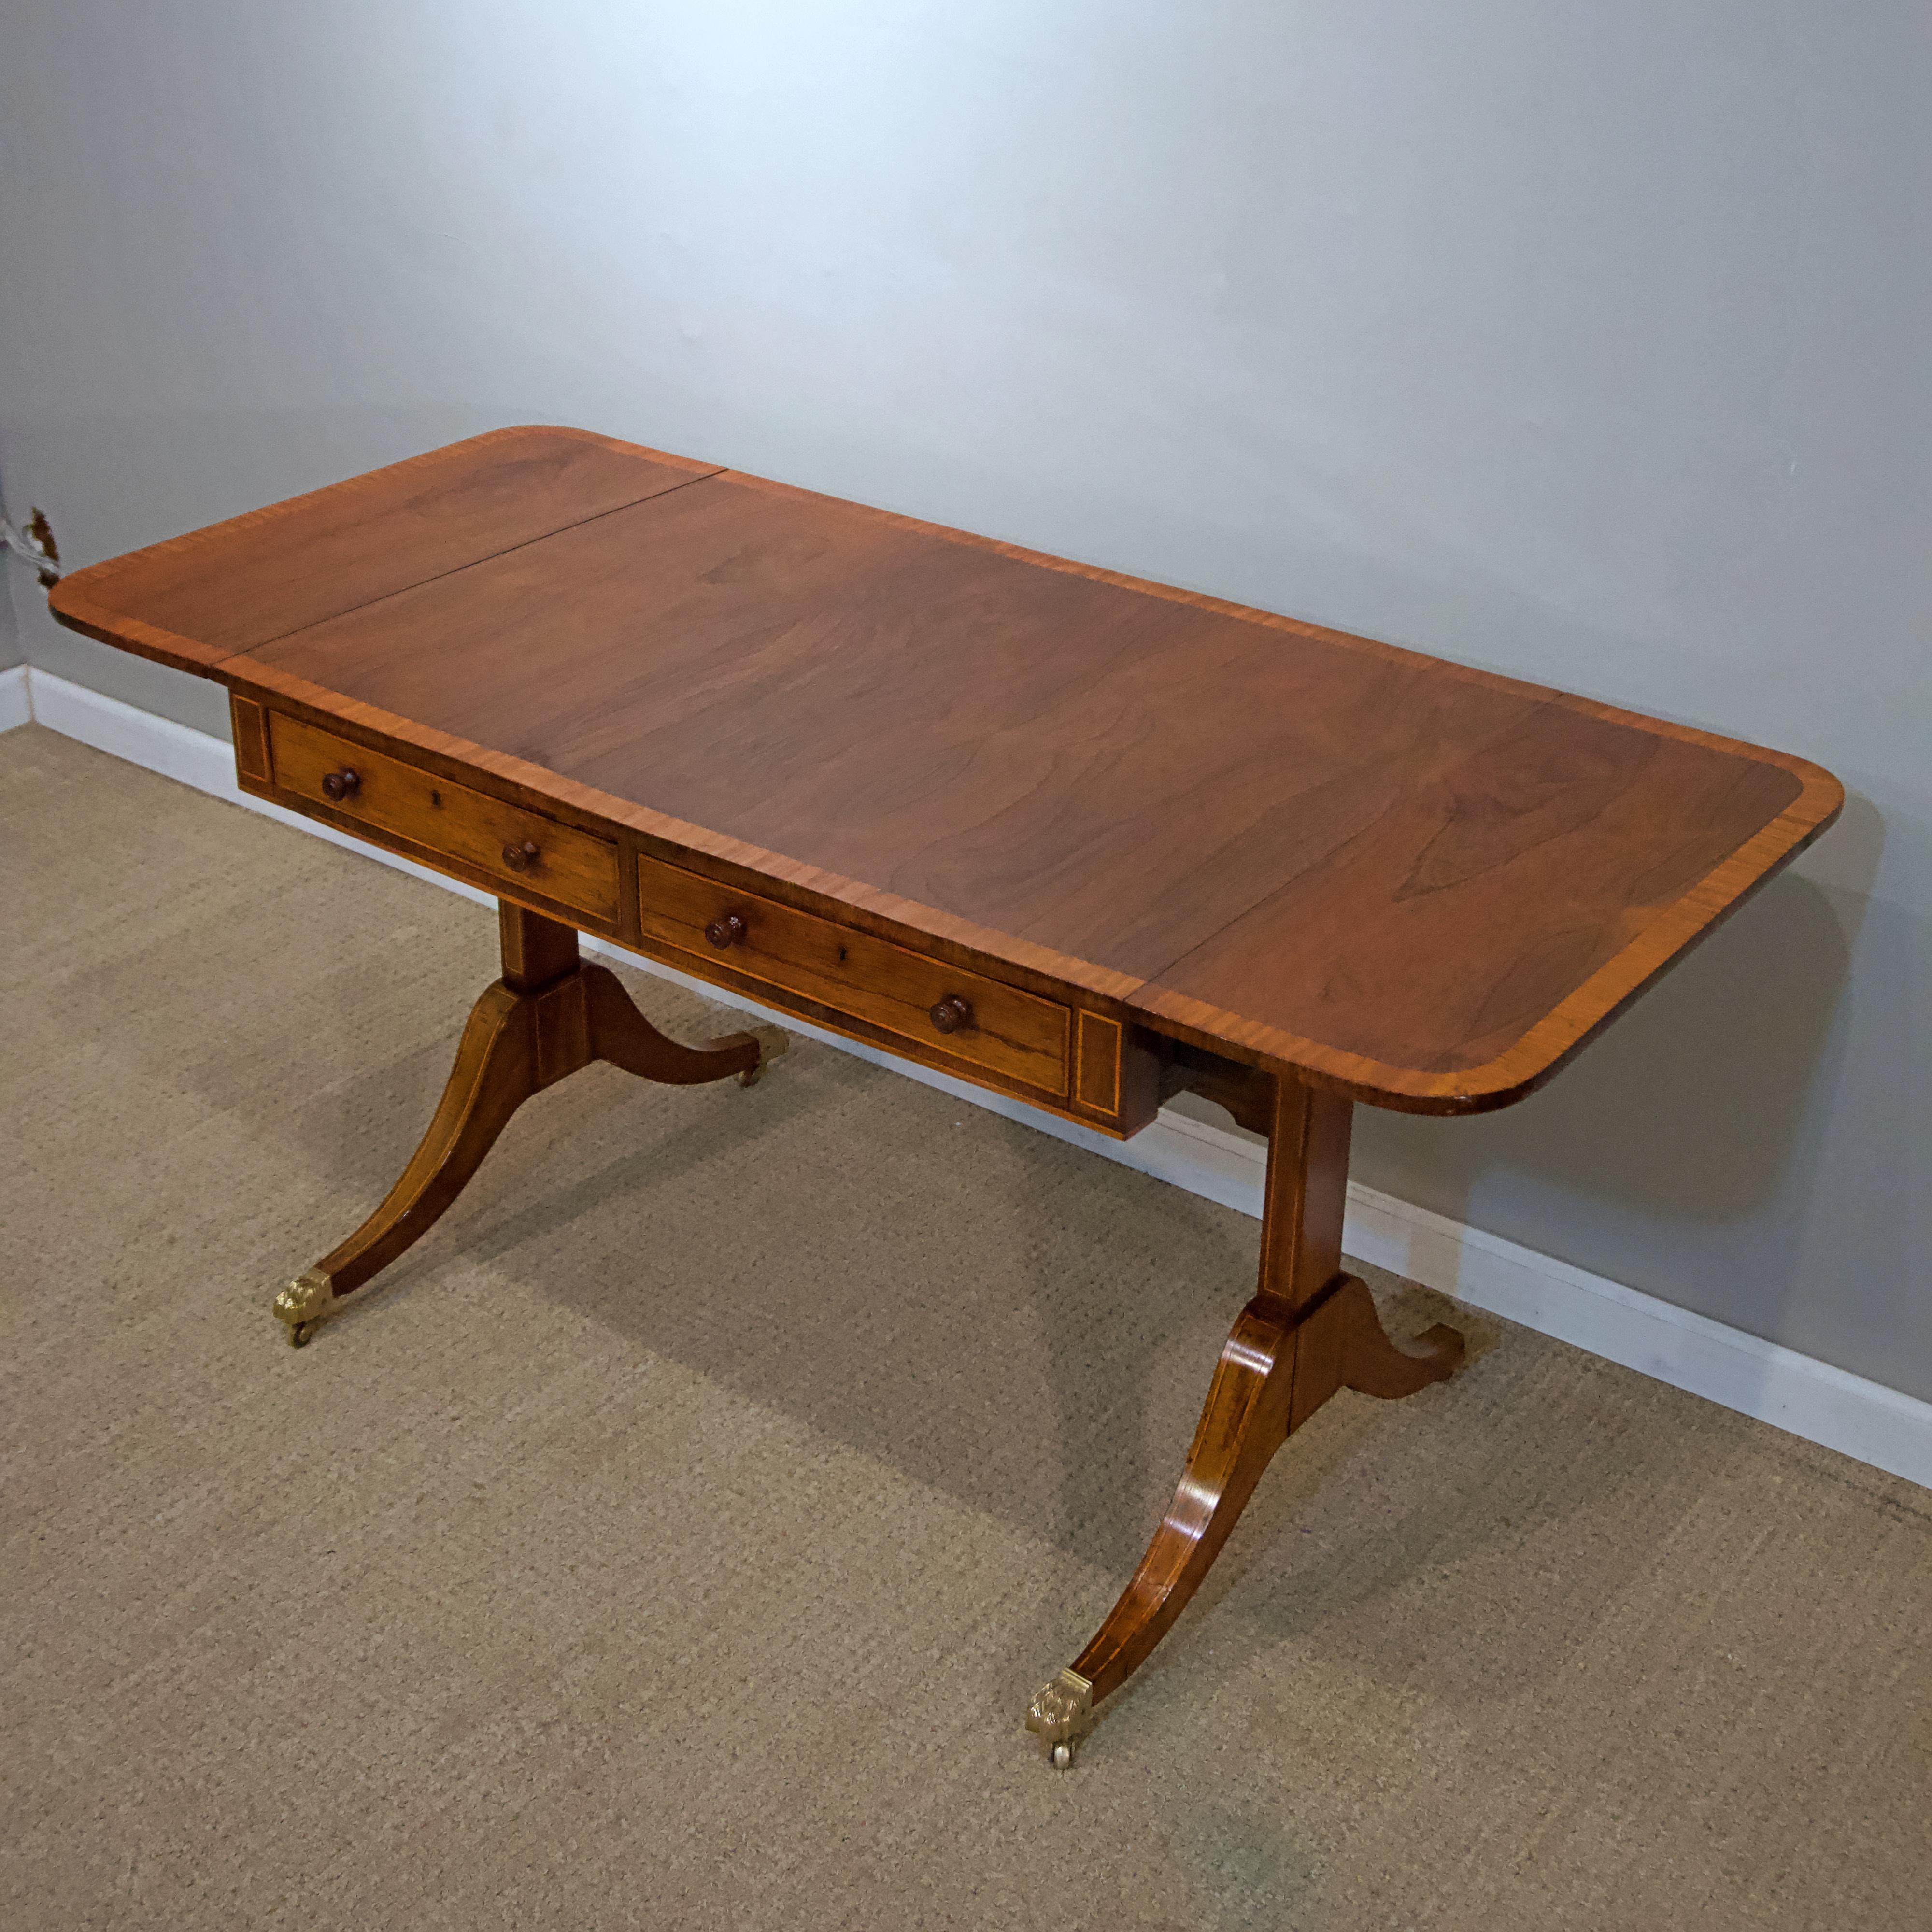 Regency rosewood sofa table

Rosewood veneered over English oak. Warmly patinated color
with wood knobs and brass casters.